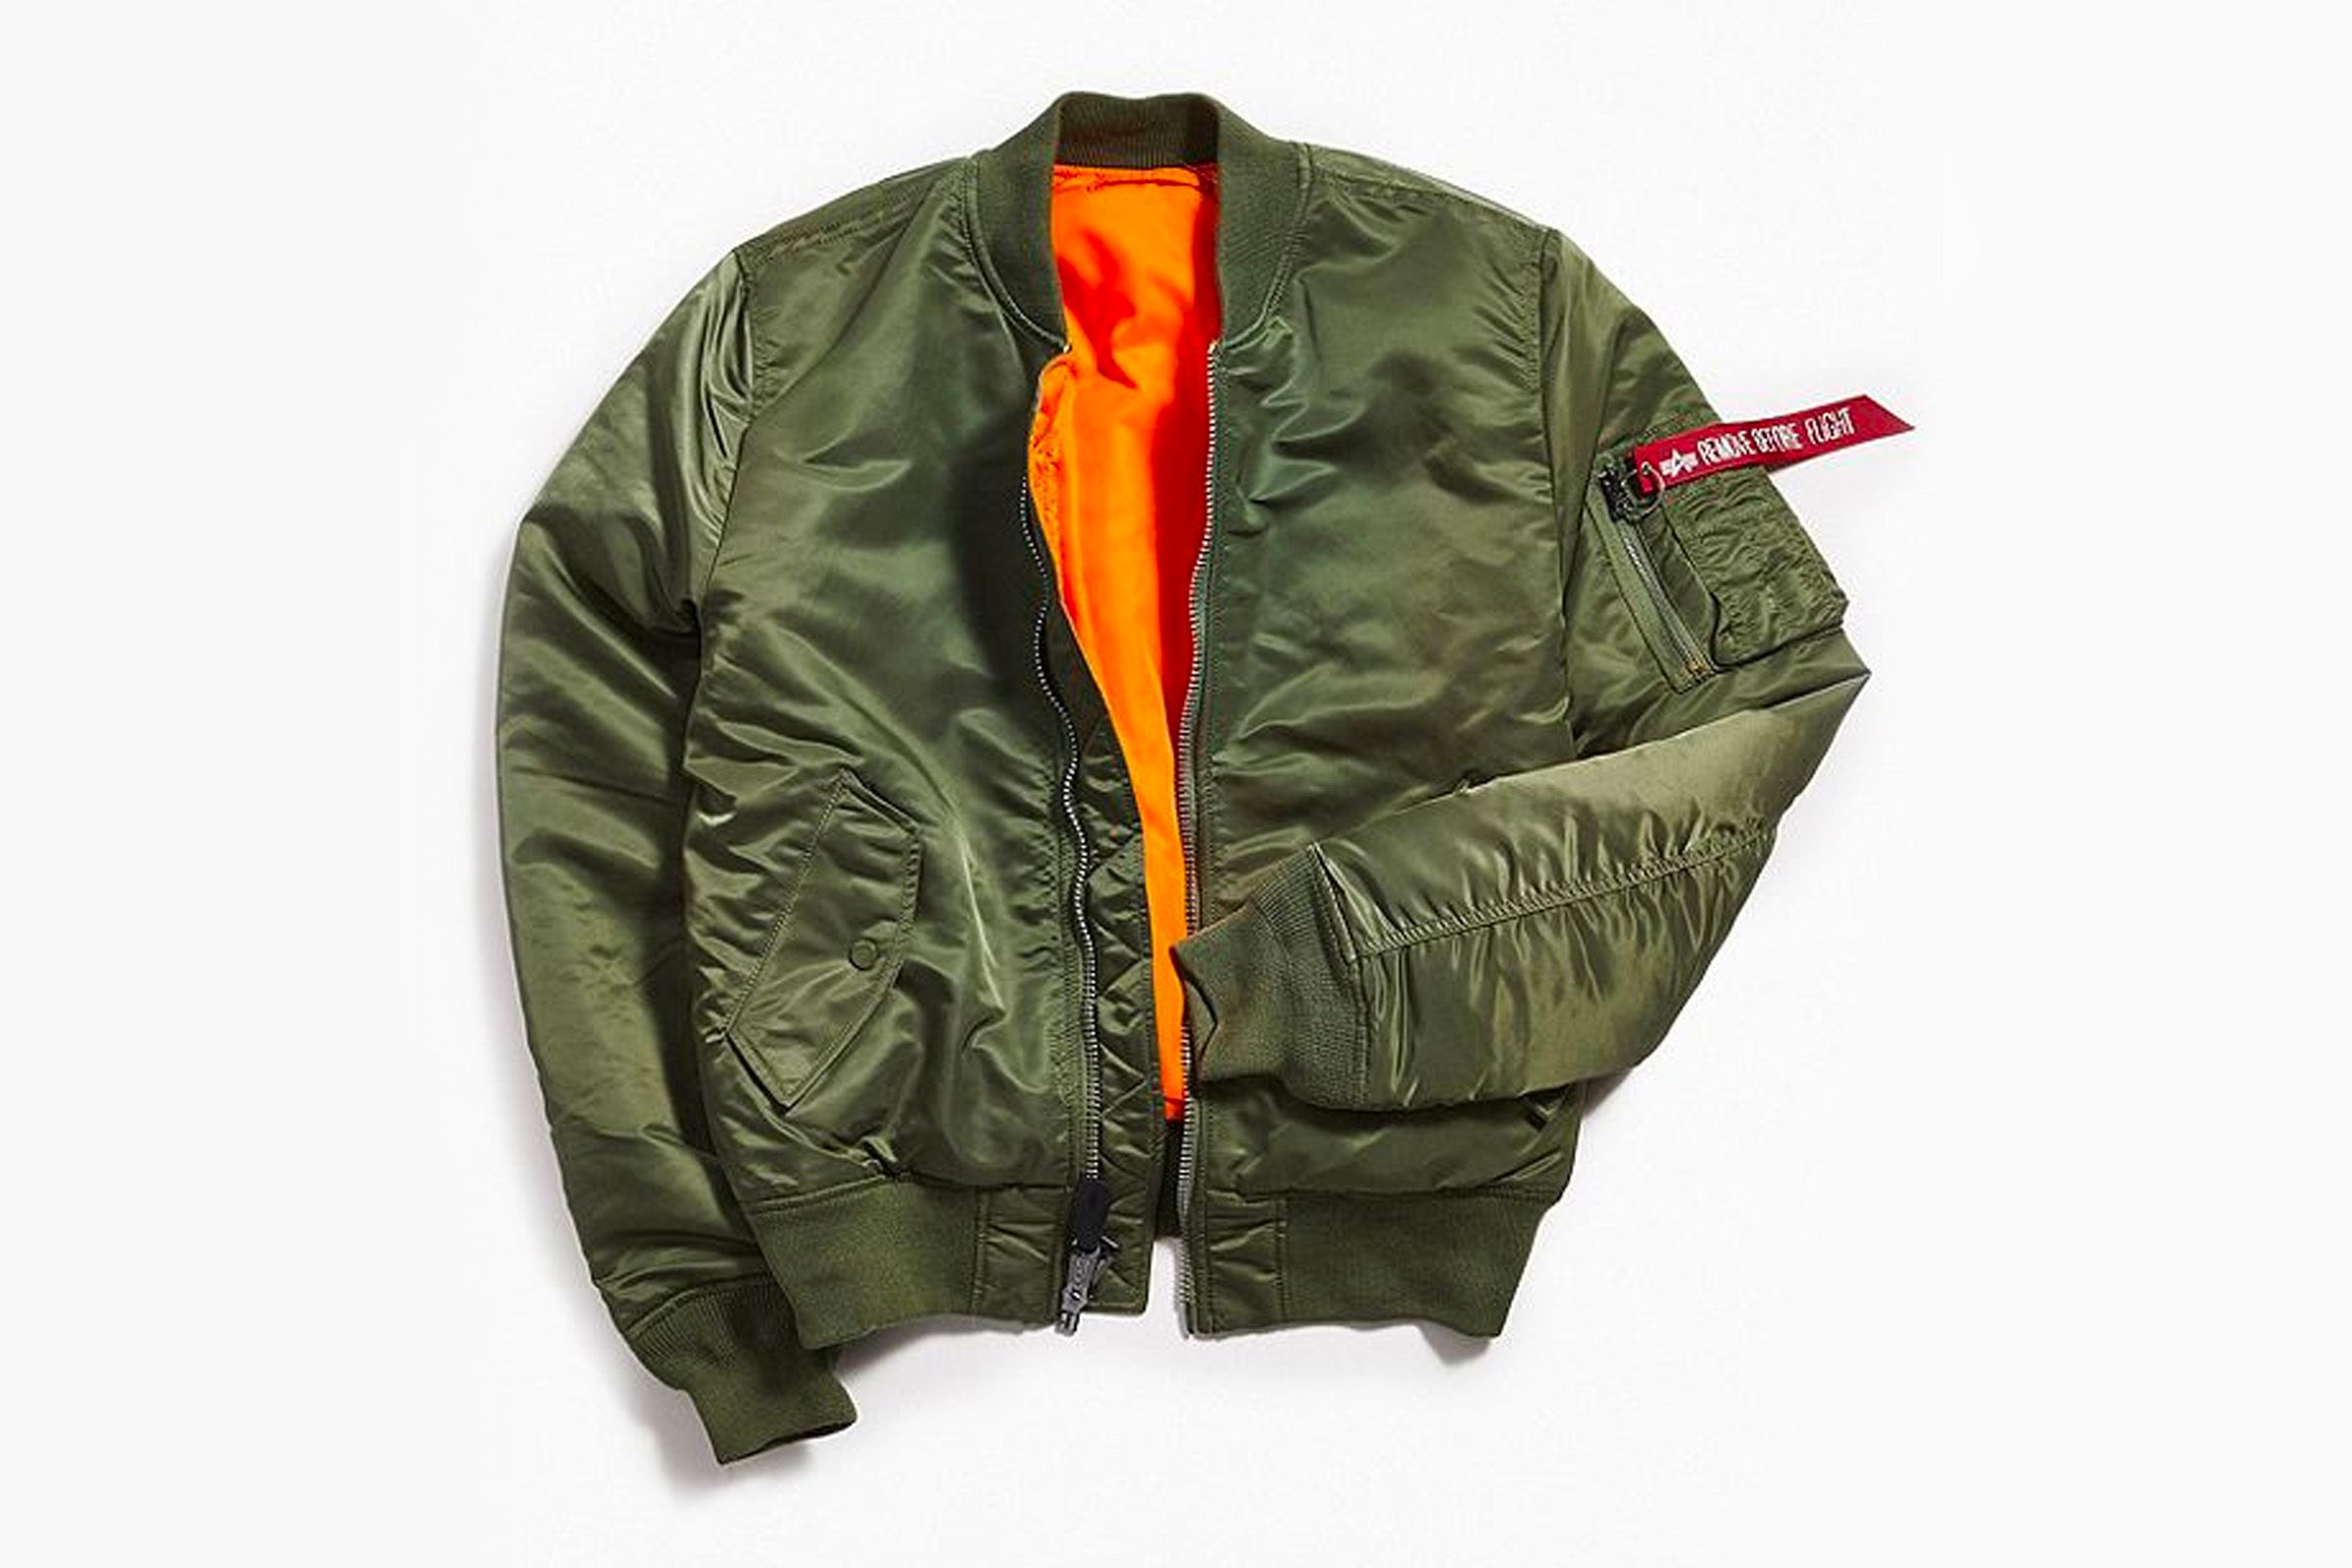 Bomber Grailed Six Brand Influenced How of Jacket | Industries: the One Decades Alpha